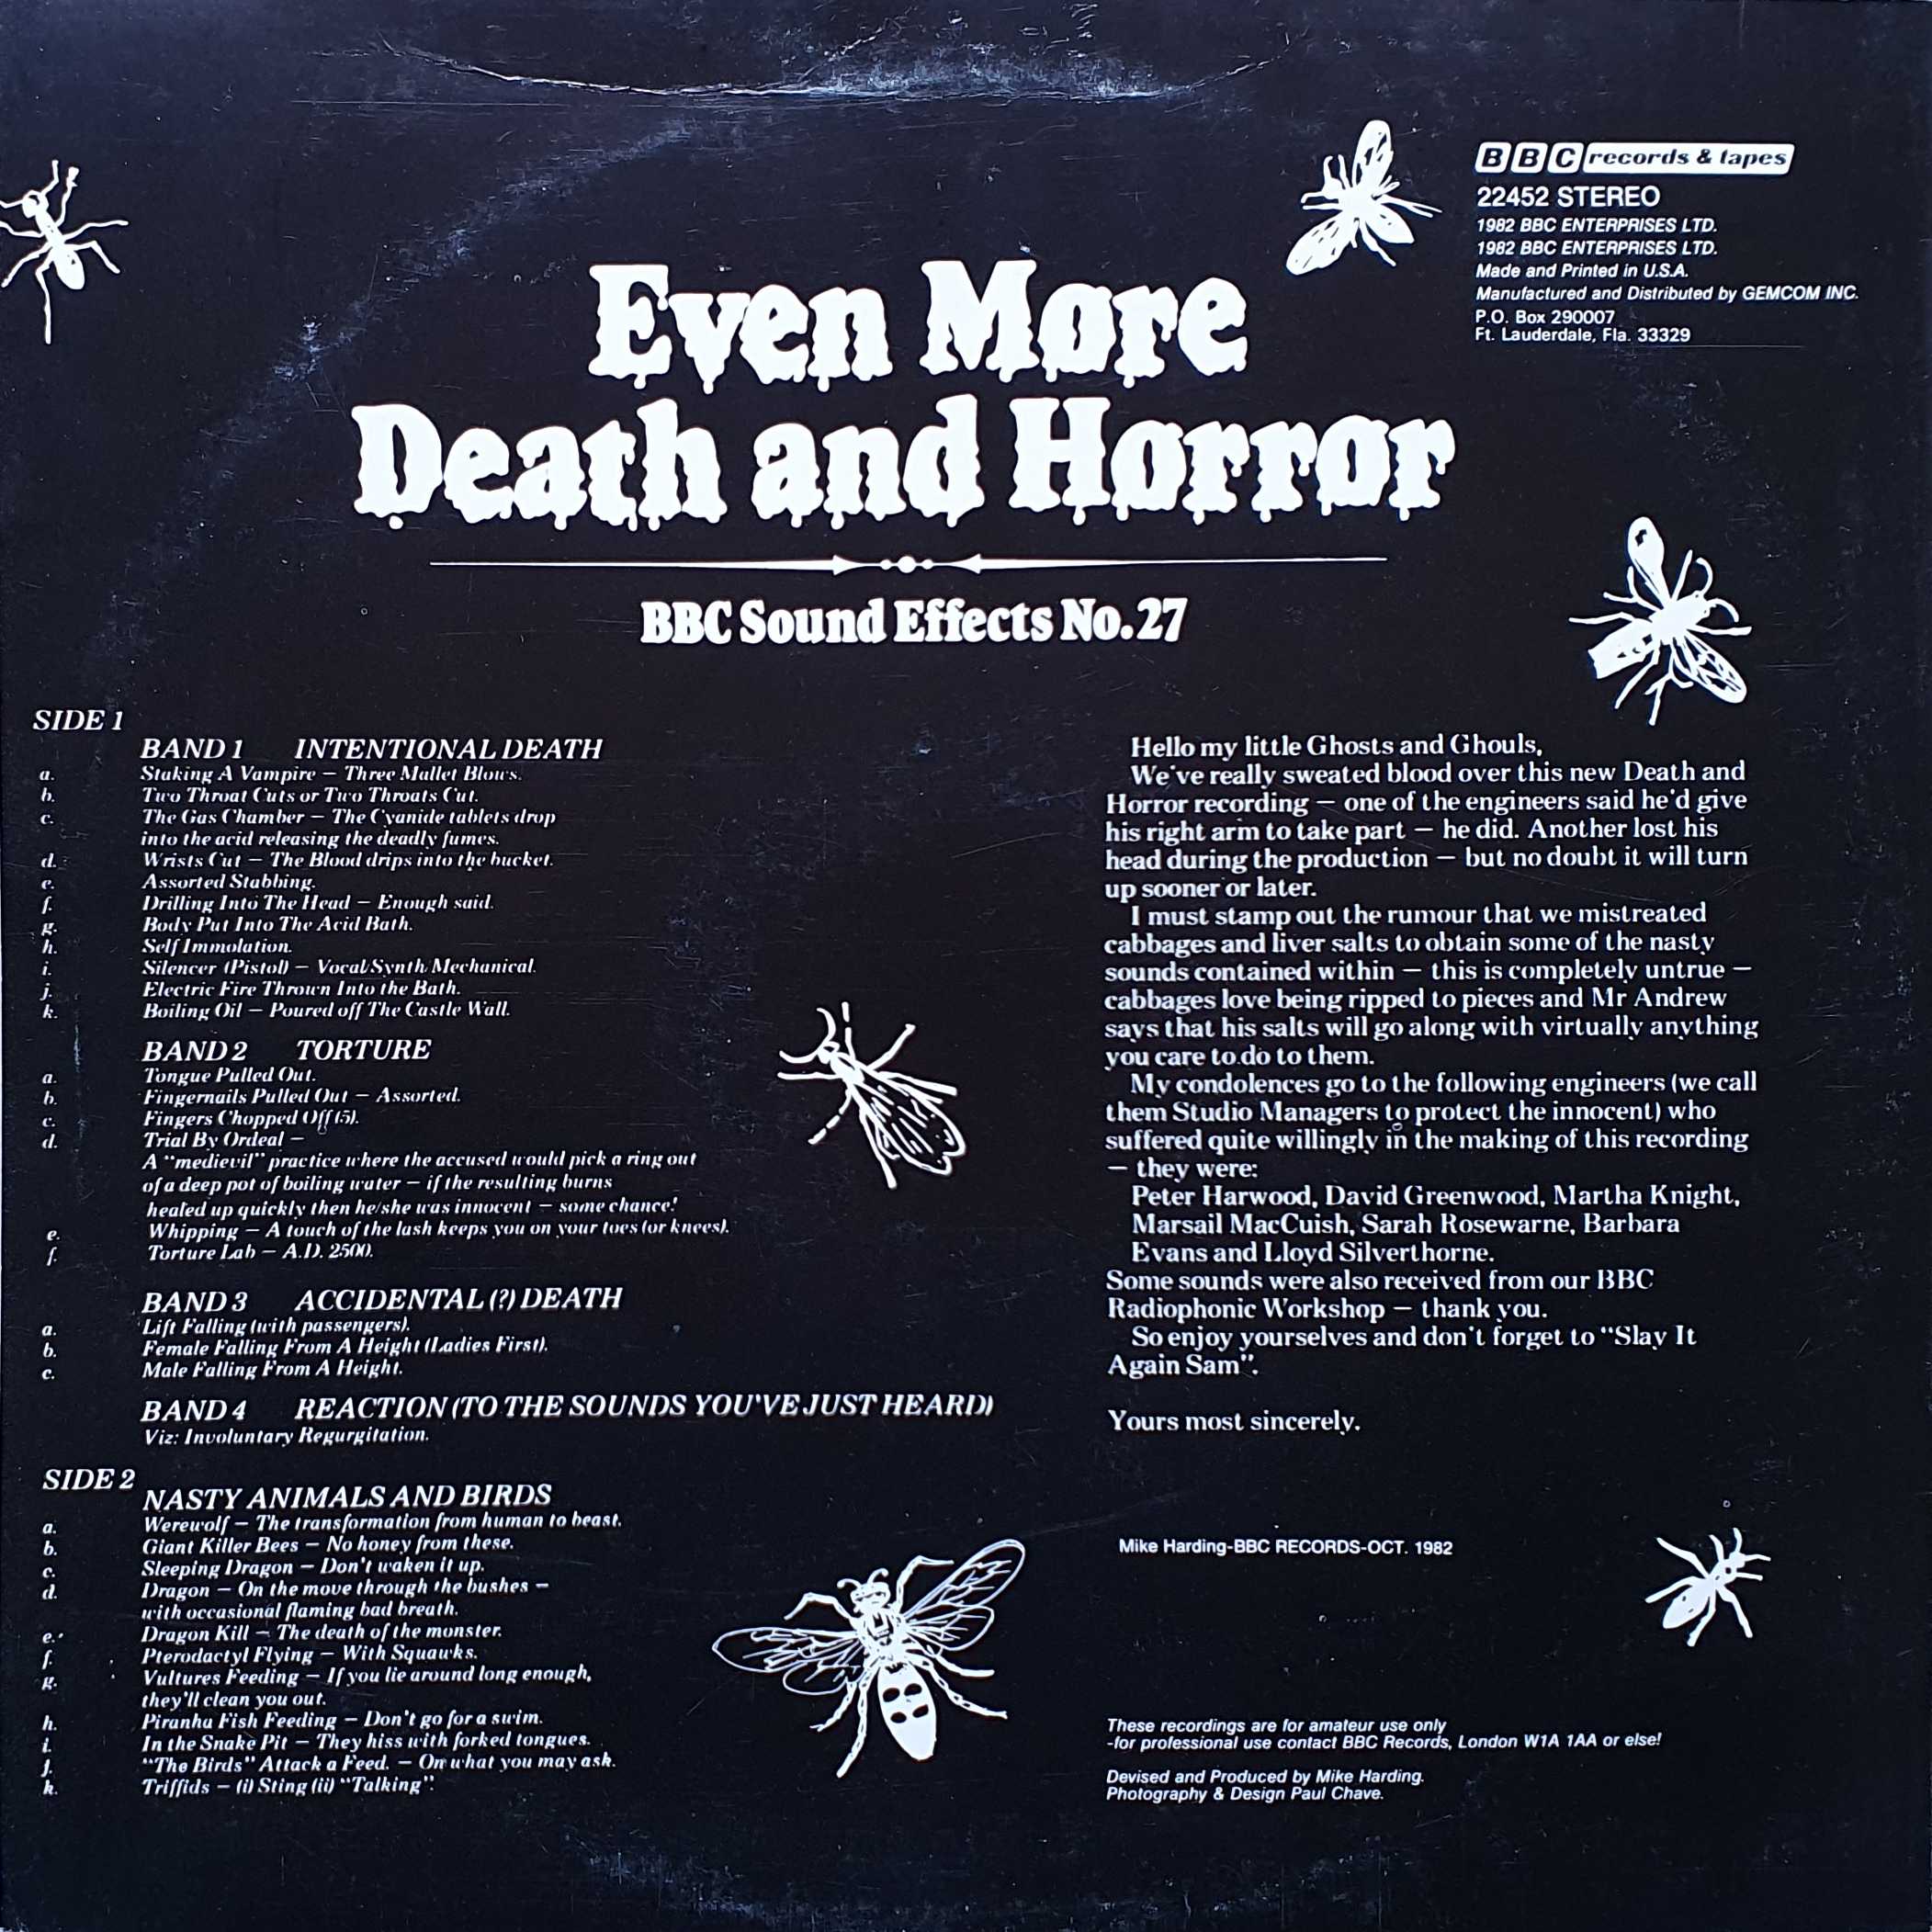 Picture of BBC - 22452 Even more death and horror by artist Various from the BBC records and Tapes library